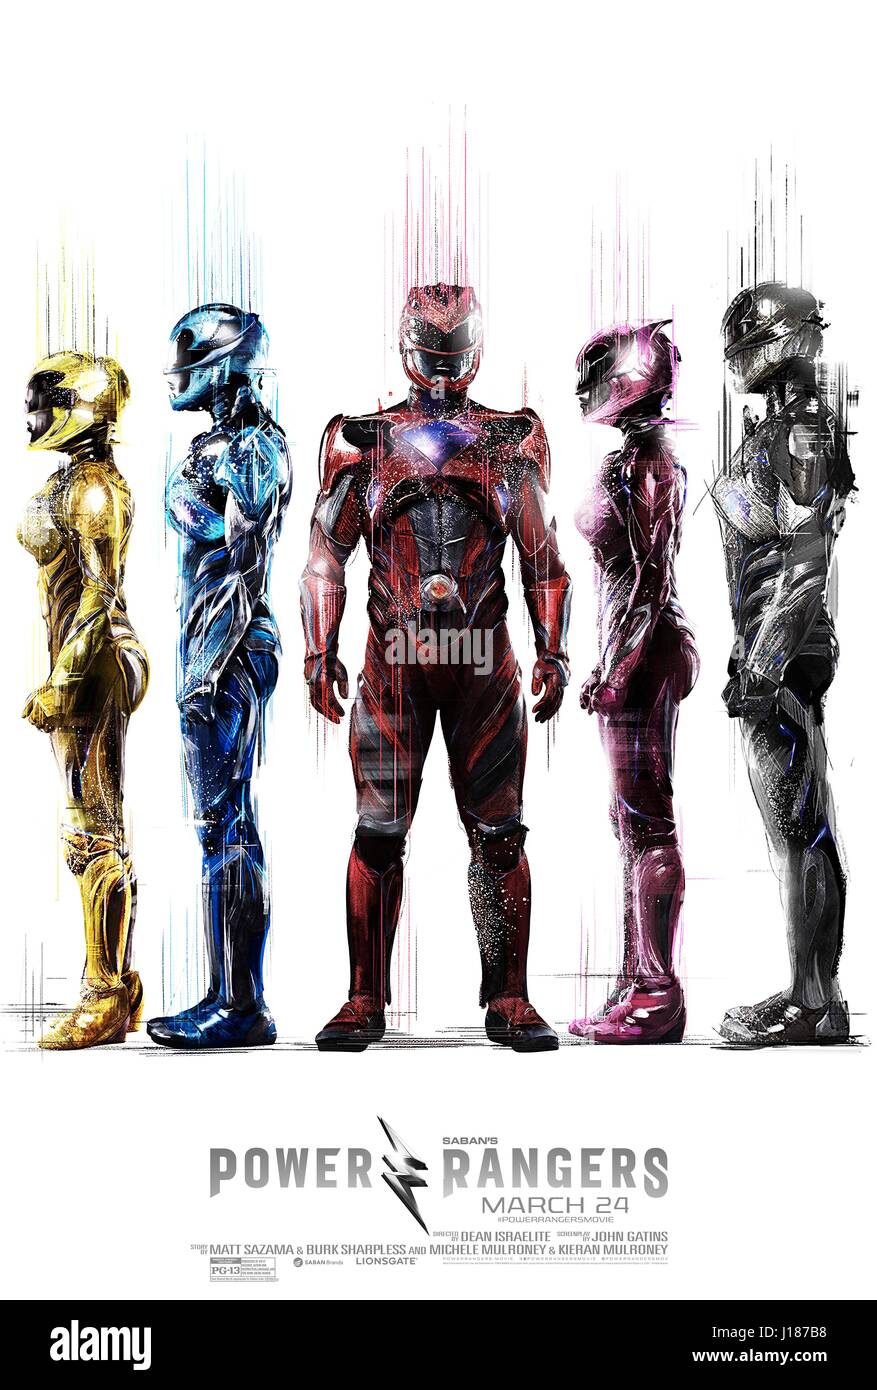 RELEASE DATE: March 24, 2017 TITLE: Power Rangers STUDIO: Lionsgate DIRECTOR: Dean Israelite PLOT: A group of high-school kids, who are infused with unique superpowers, harness their abilities in order to save the world STARRING: Becky G., Ludi Lin, Dacre Montgomery, Naomi Scott, Rj Cyler. (Credit: © Lionsgate/Entertainment Pictures) Stock Photo